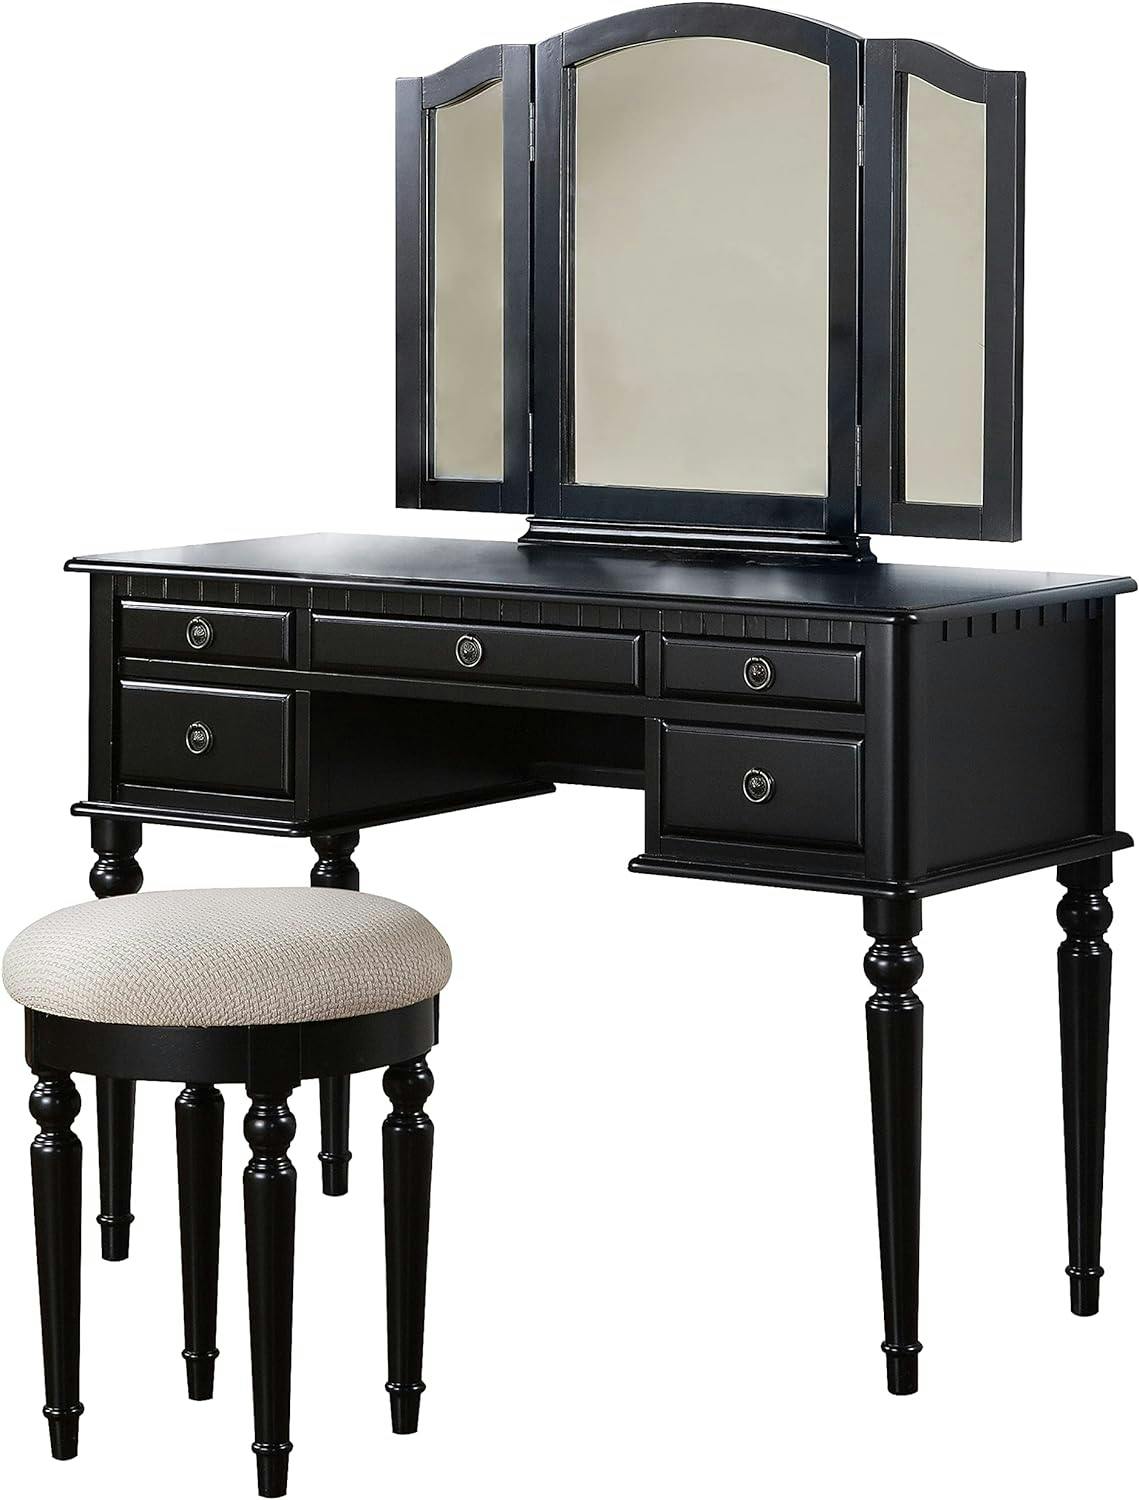 Hollywood Nostalgia Brush Champagne Vanity Set with Stool and Mirror